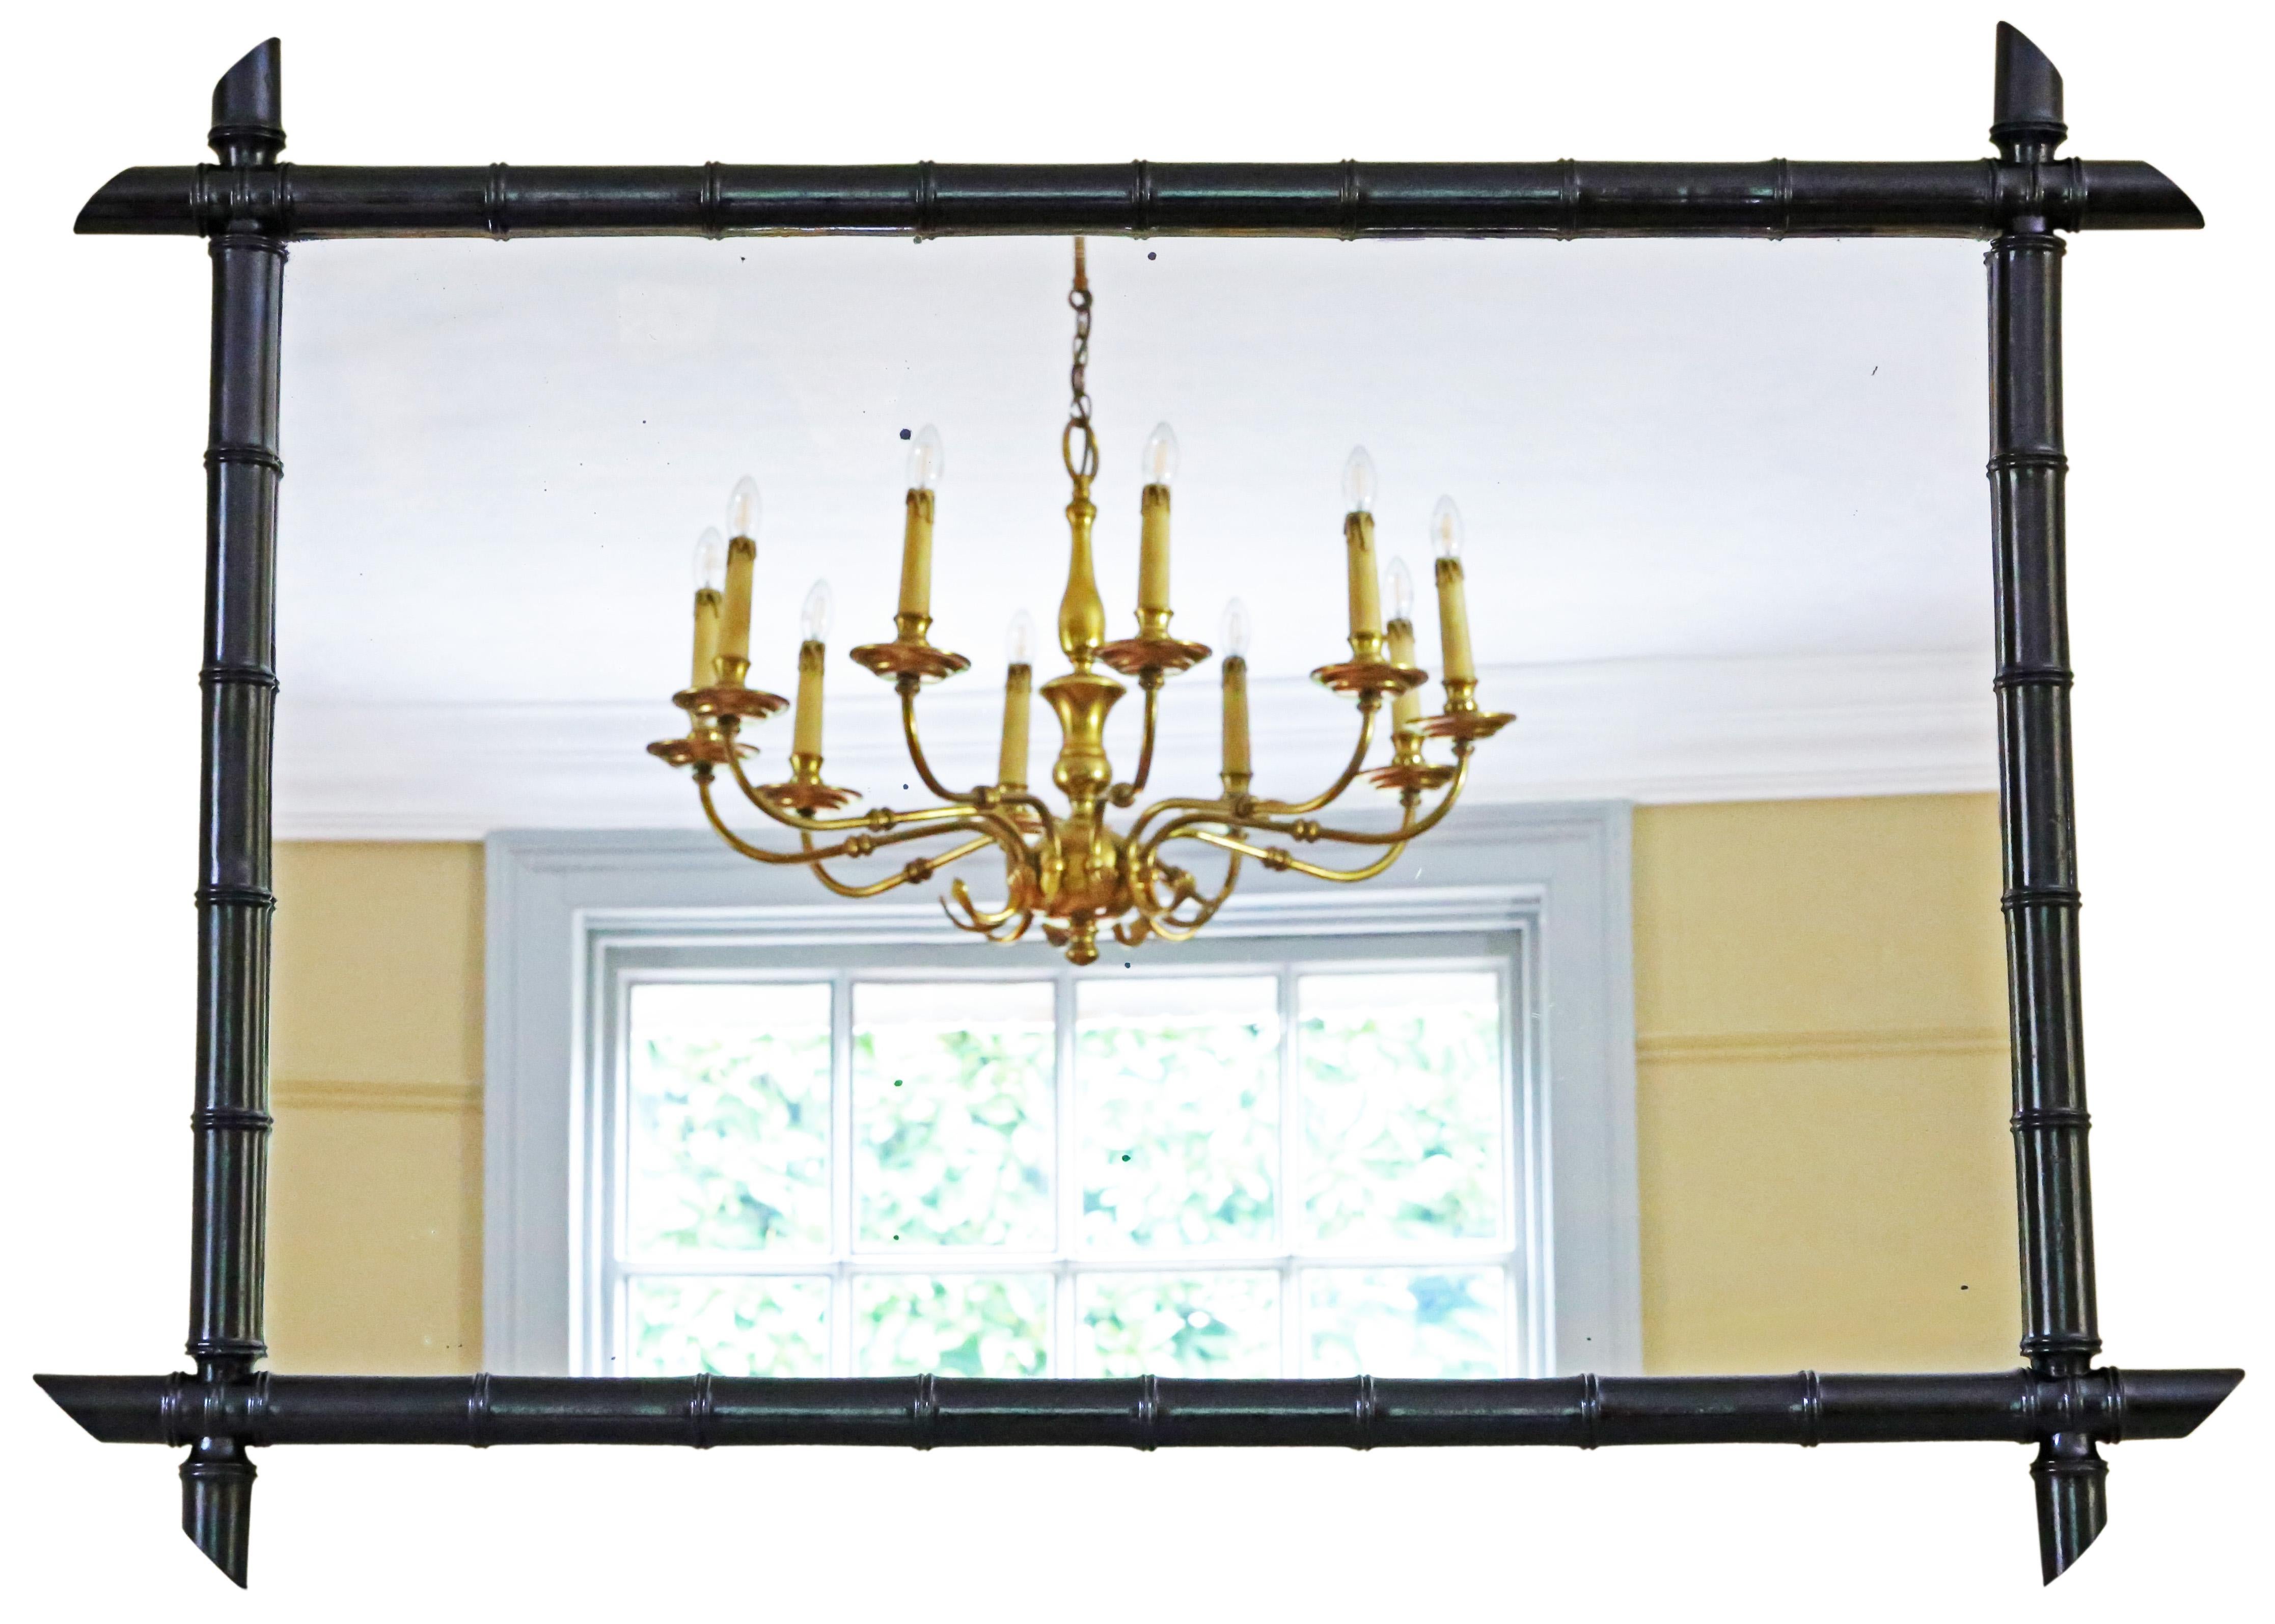 Splendid large ebonised faux bamboo overmantle wall mirror from the 19th Century, boasting fine craftsmanship, charm, and elegance.

This uncommon and enchanting mirror stands out as a noteworthy decorative find, offering an impressive piece that